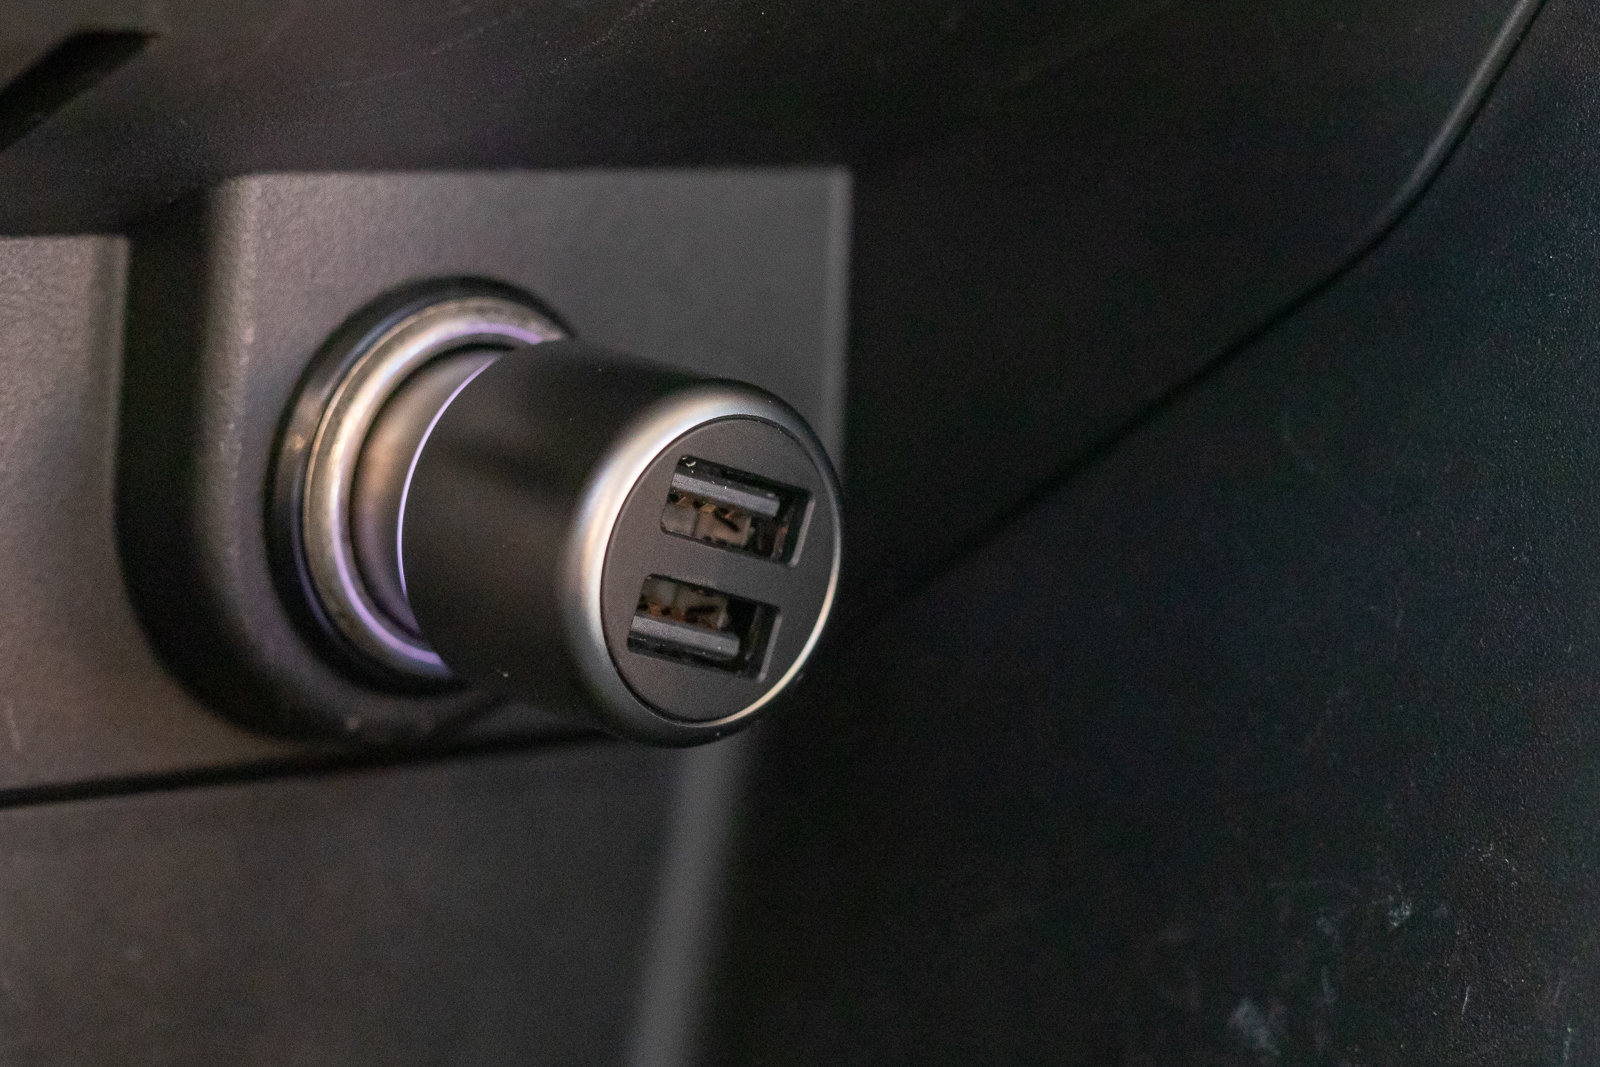 USB car charger